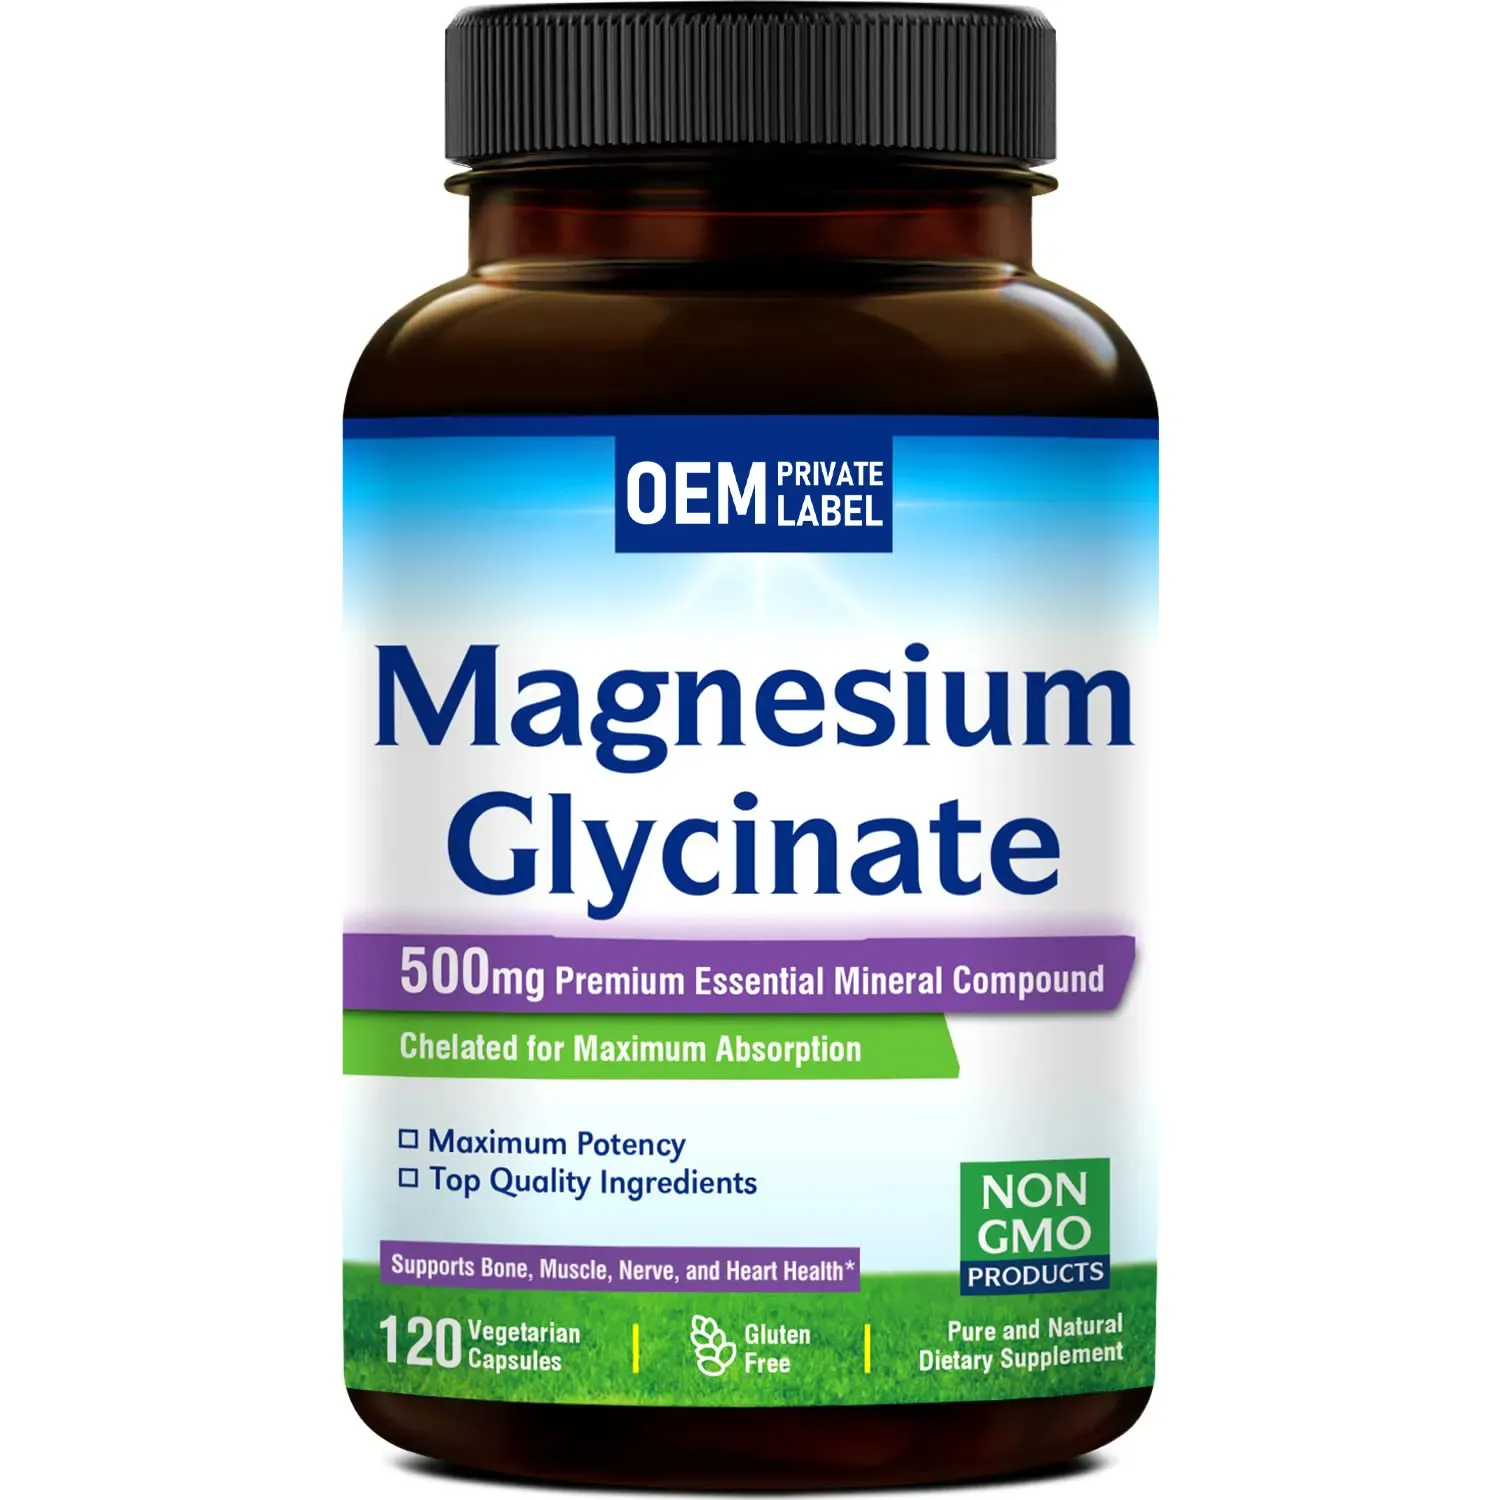 Private label Magnesium supplement magnesium glycinate capsules 500mg for Stress, Relaxation, Muscle & Bone Health Support